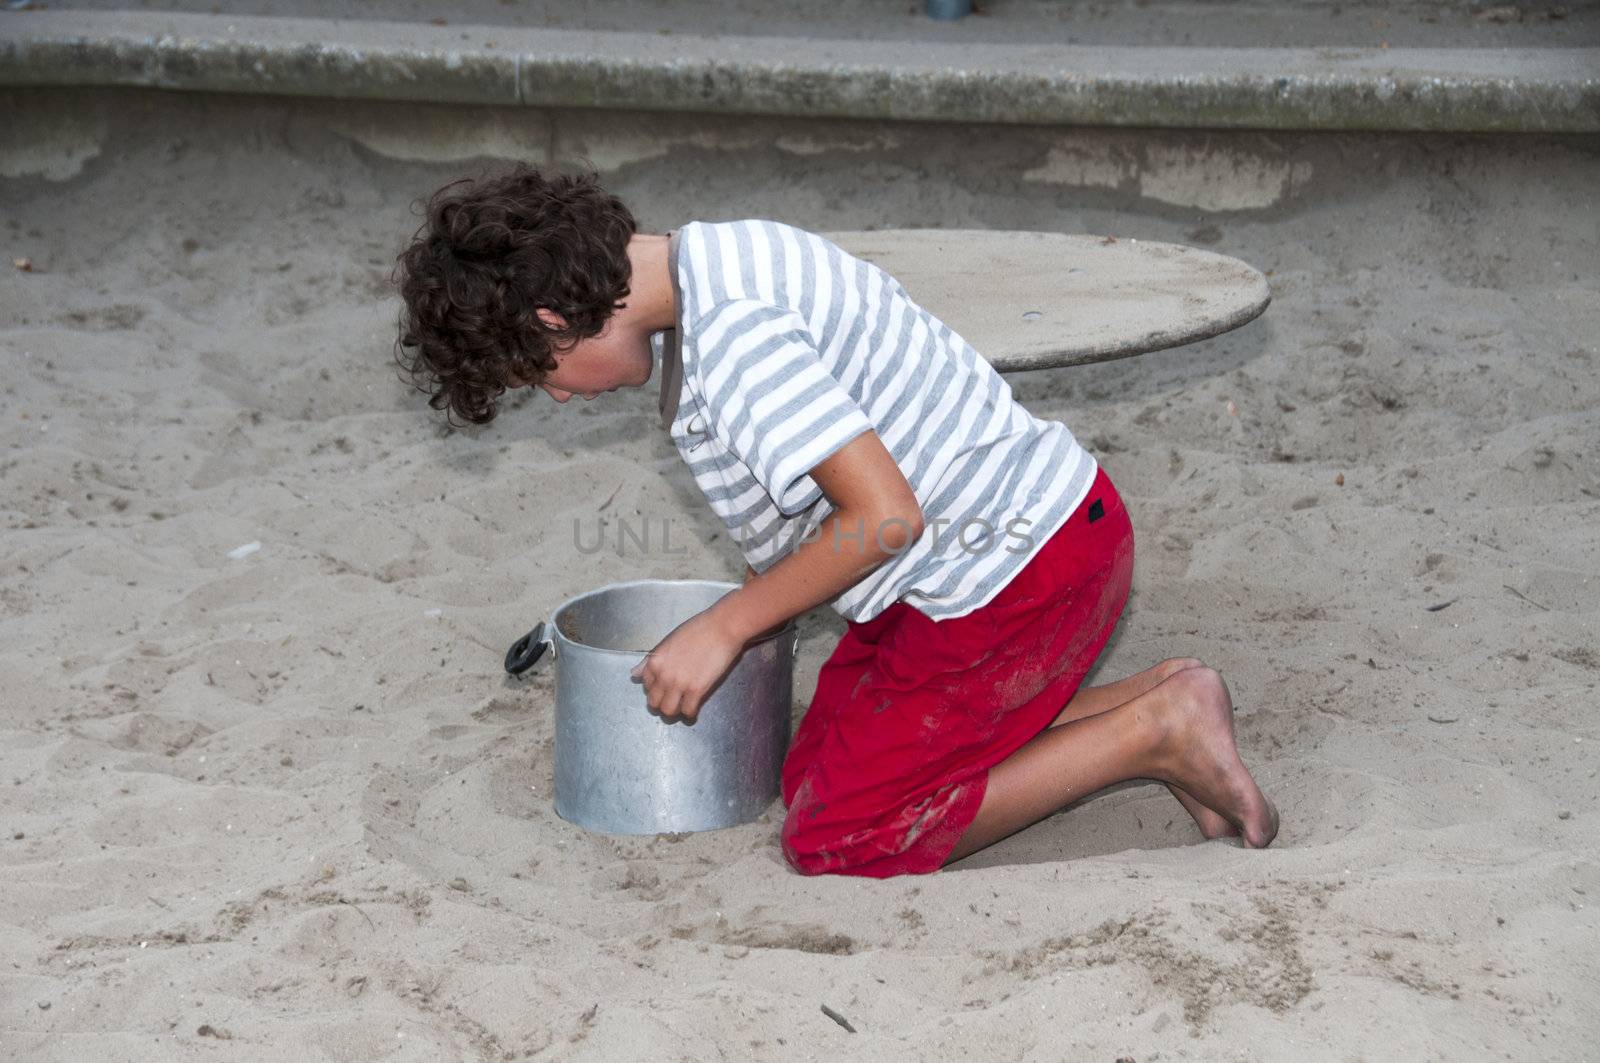 boy playing in the sandpit  by compuinfoto